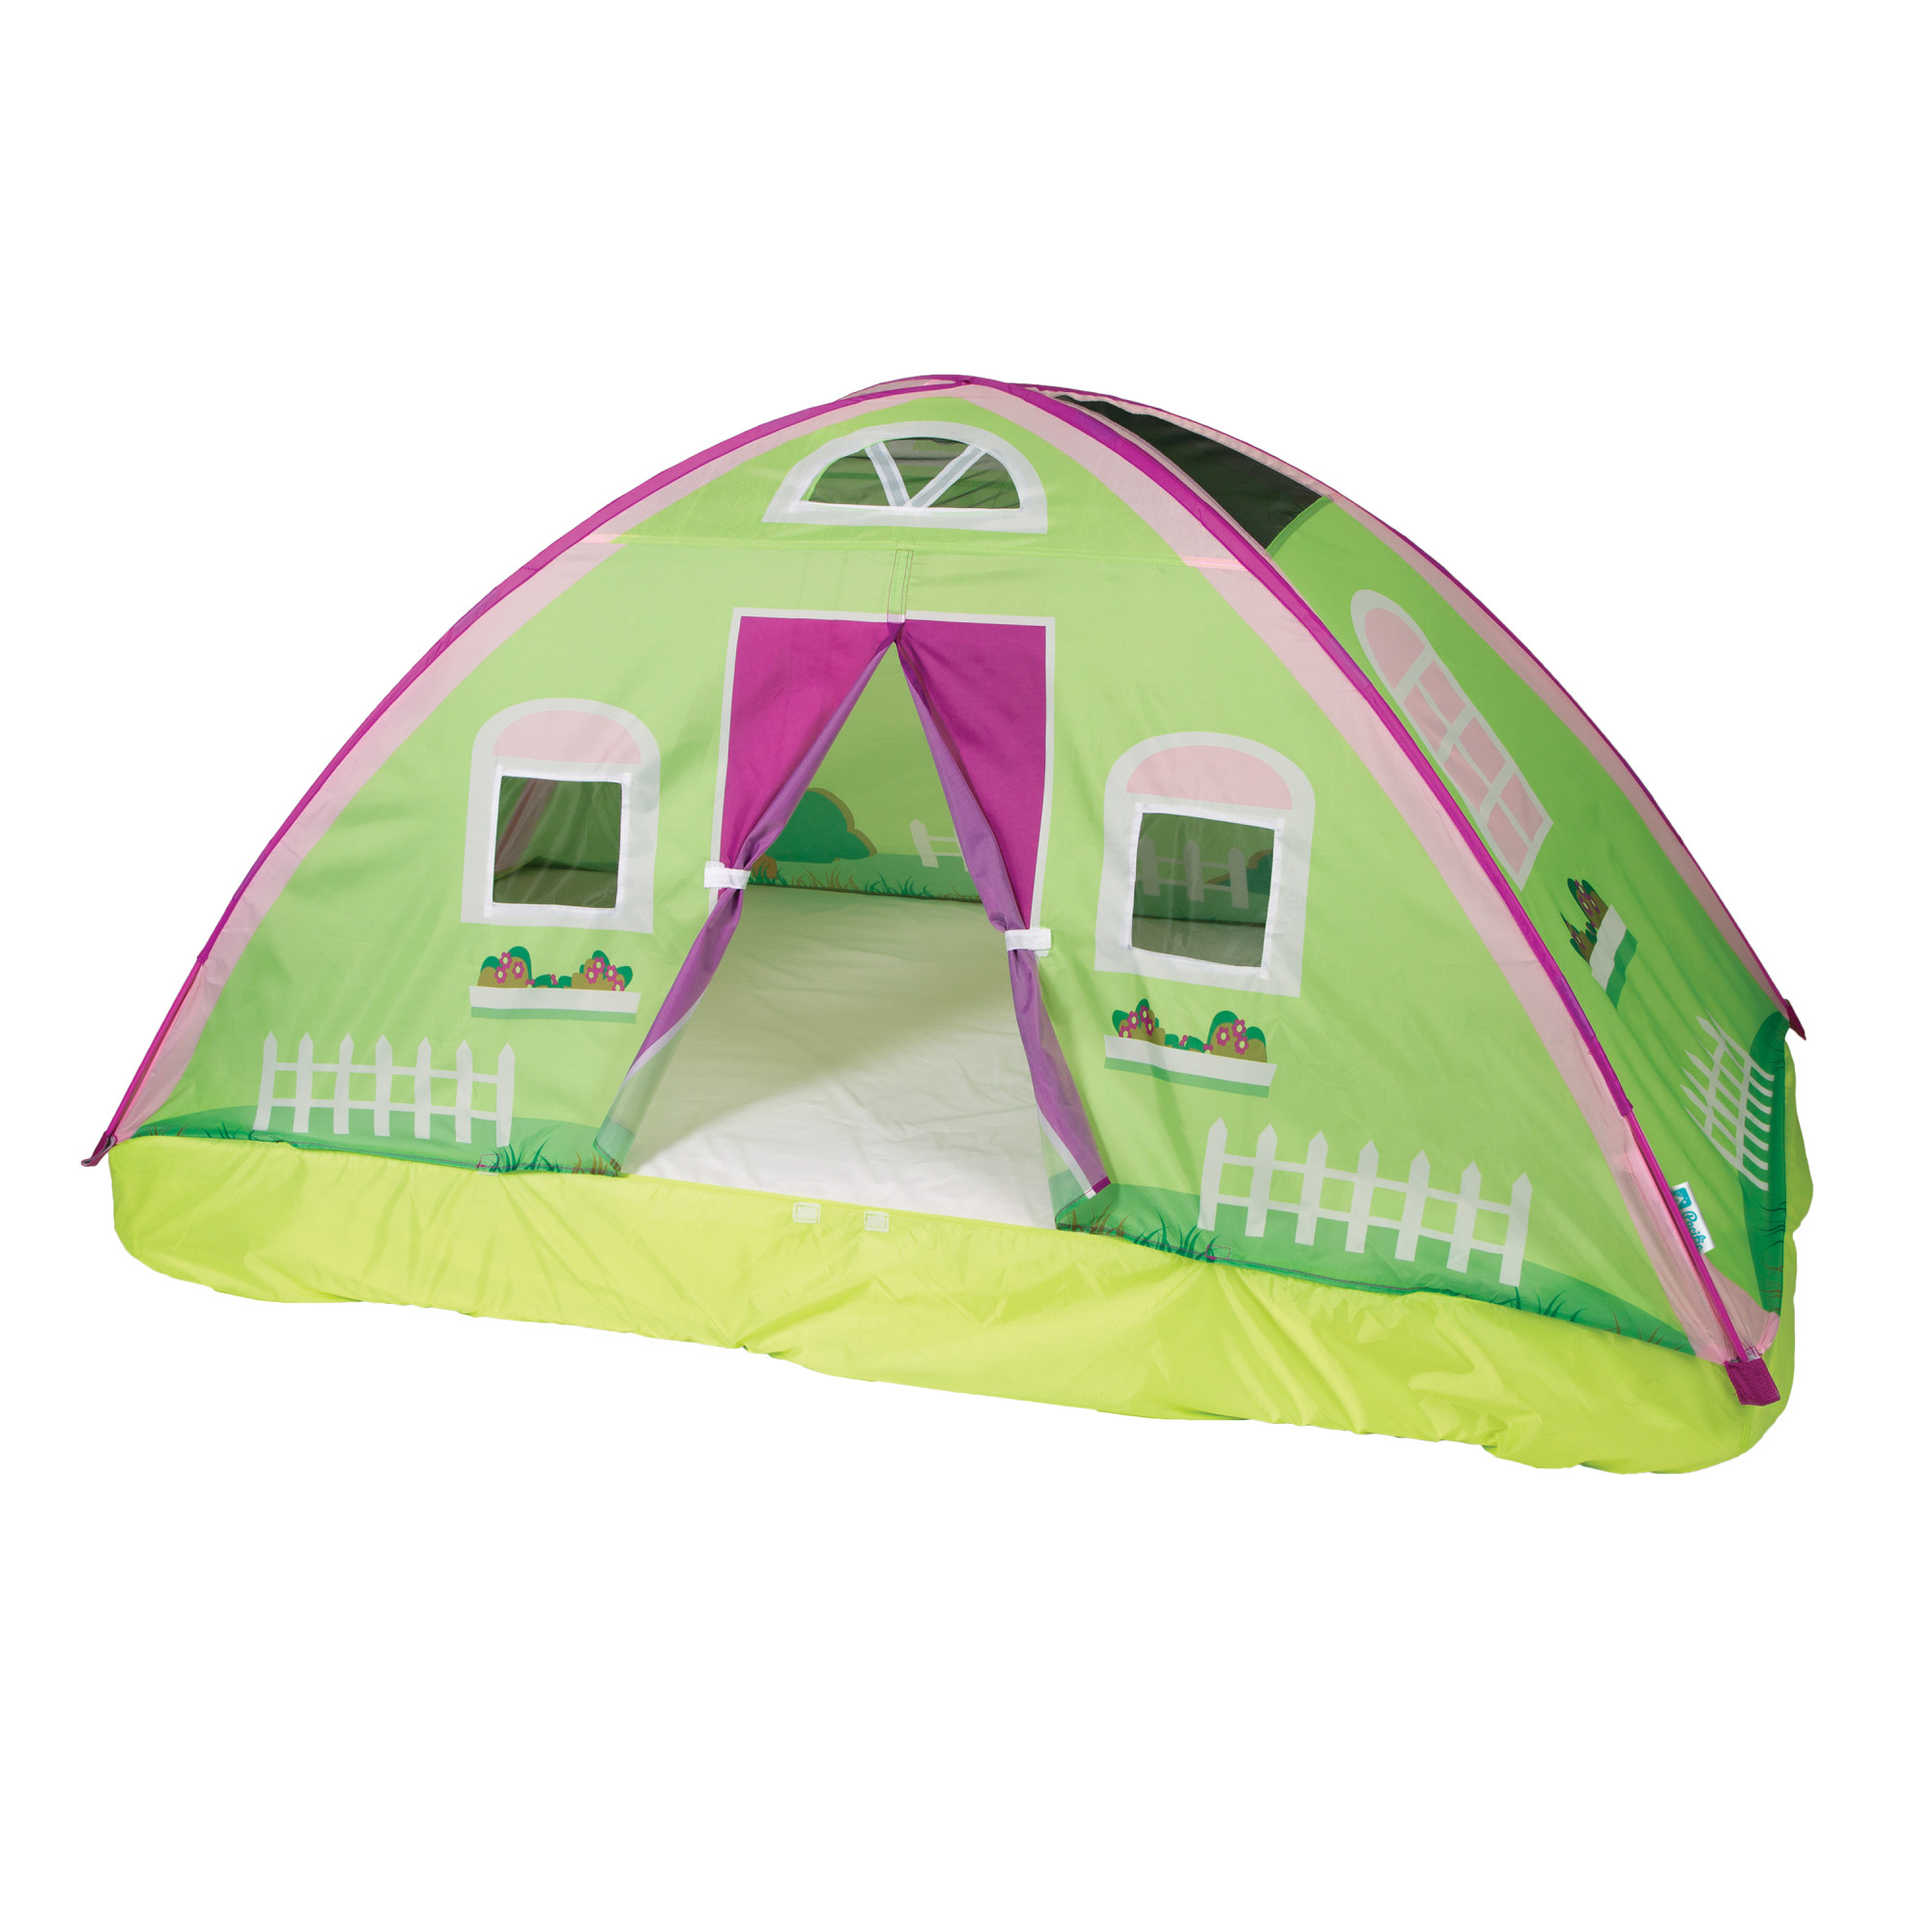 Pacific Play Tents Cottage Bed Tent, Twin - image 4 of 17